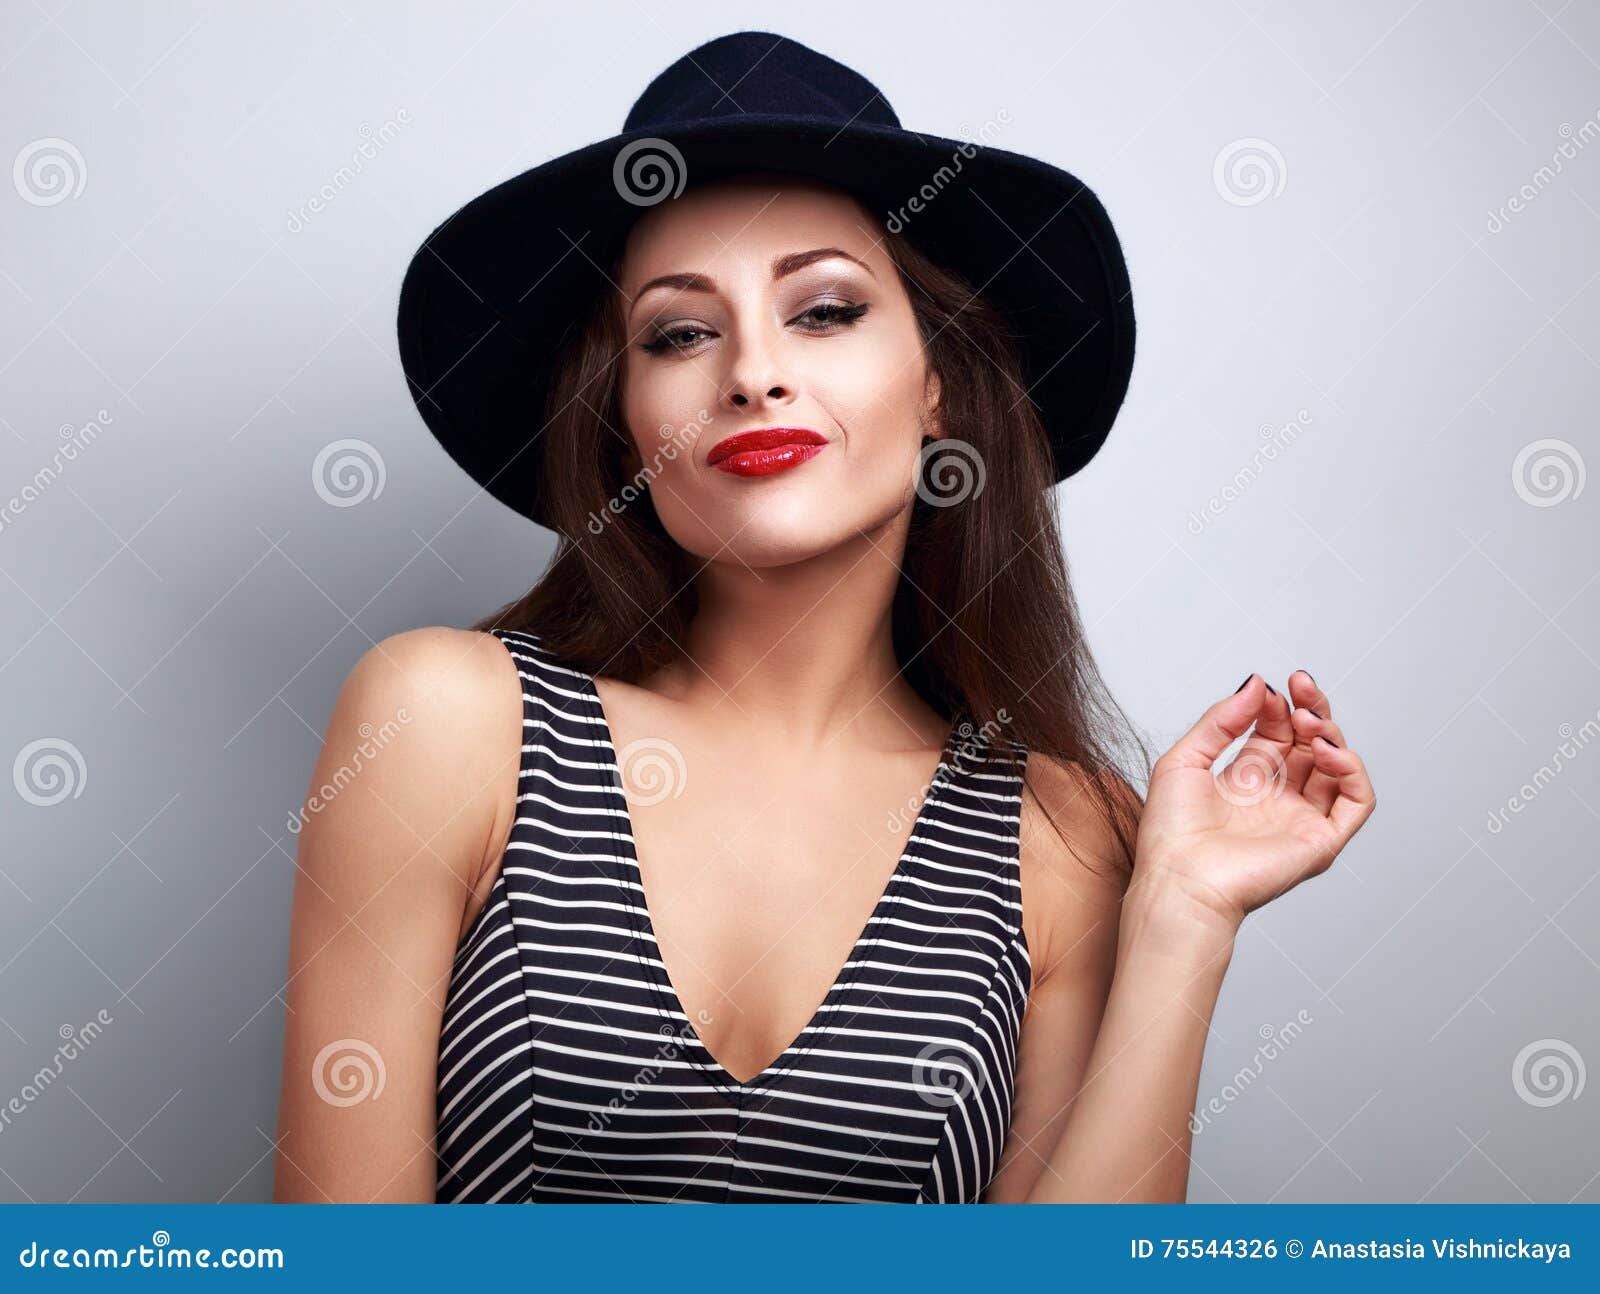 Makeup Woman in Black Fashion Hat and Bright Red Lipstick P Stock Photo ...